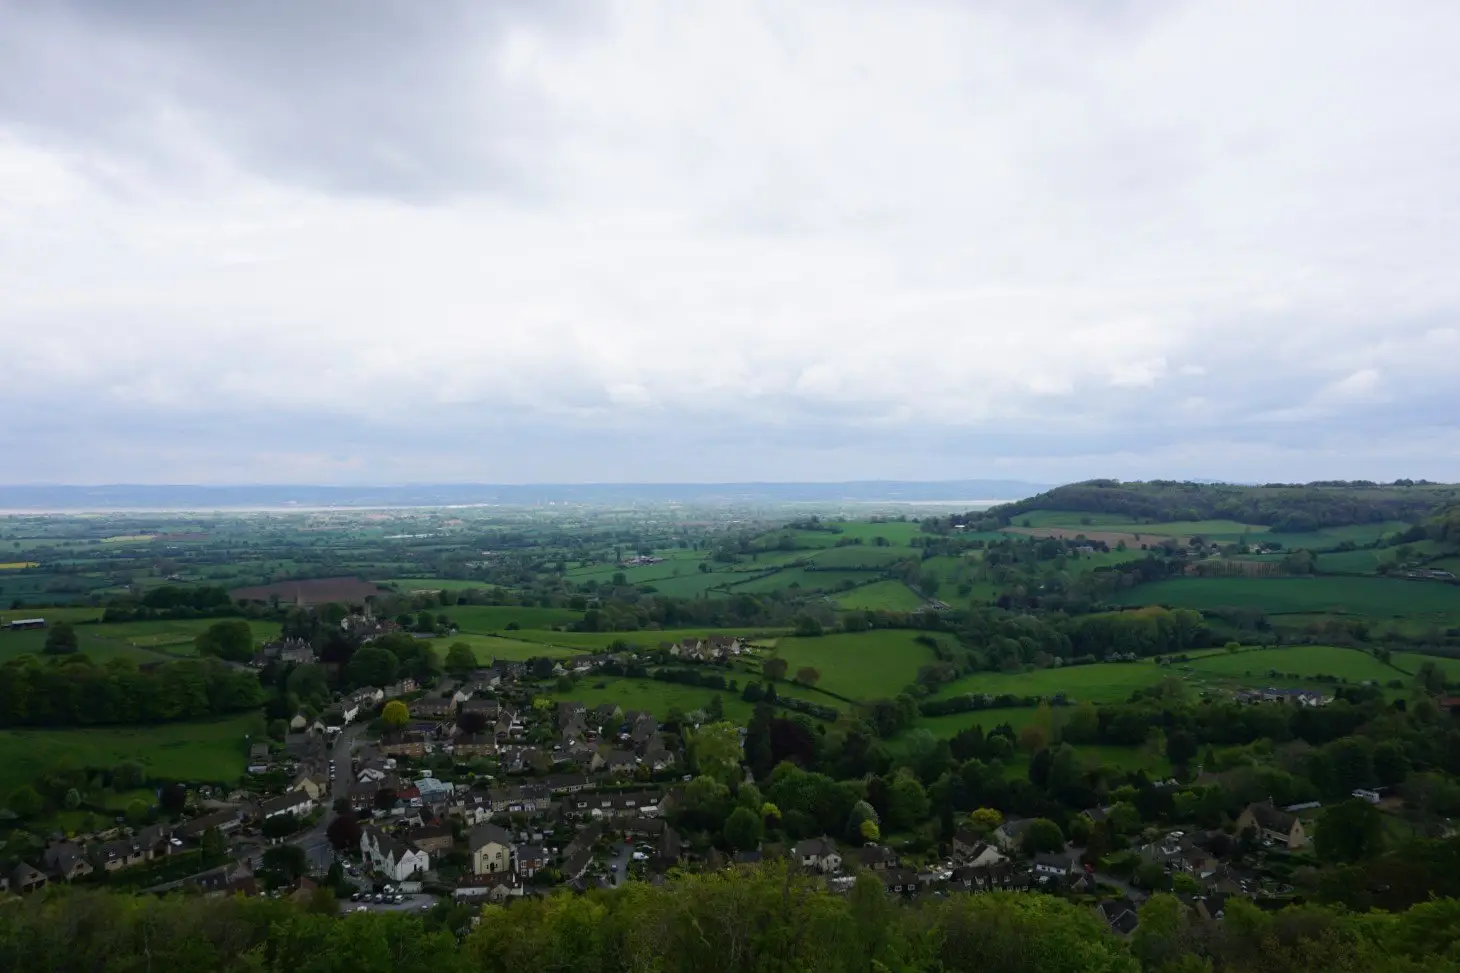 Views of the Cotswolds from the Tyndale Monument